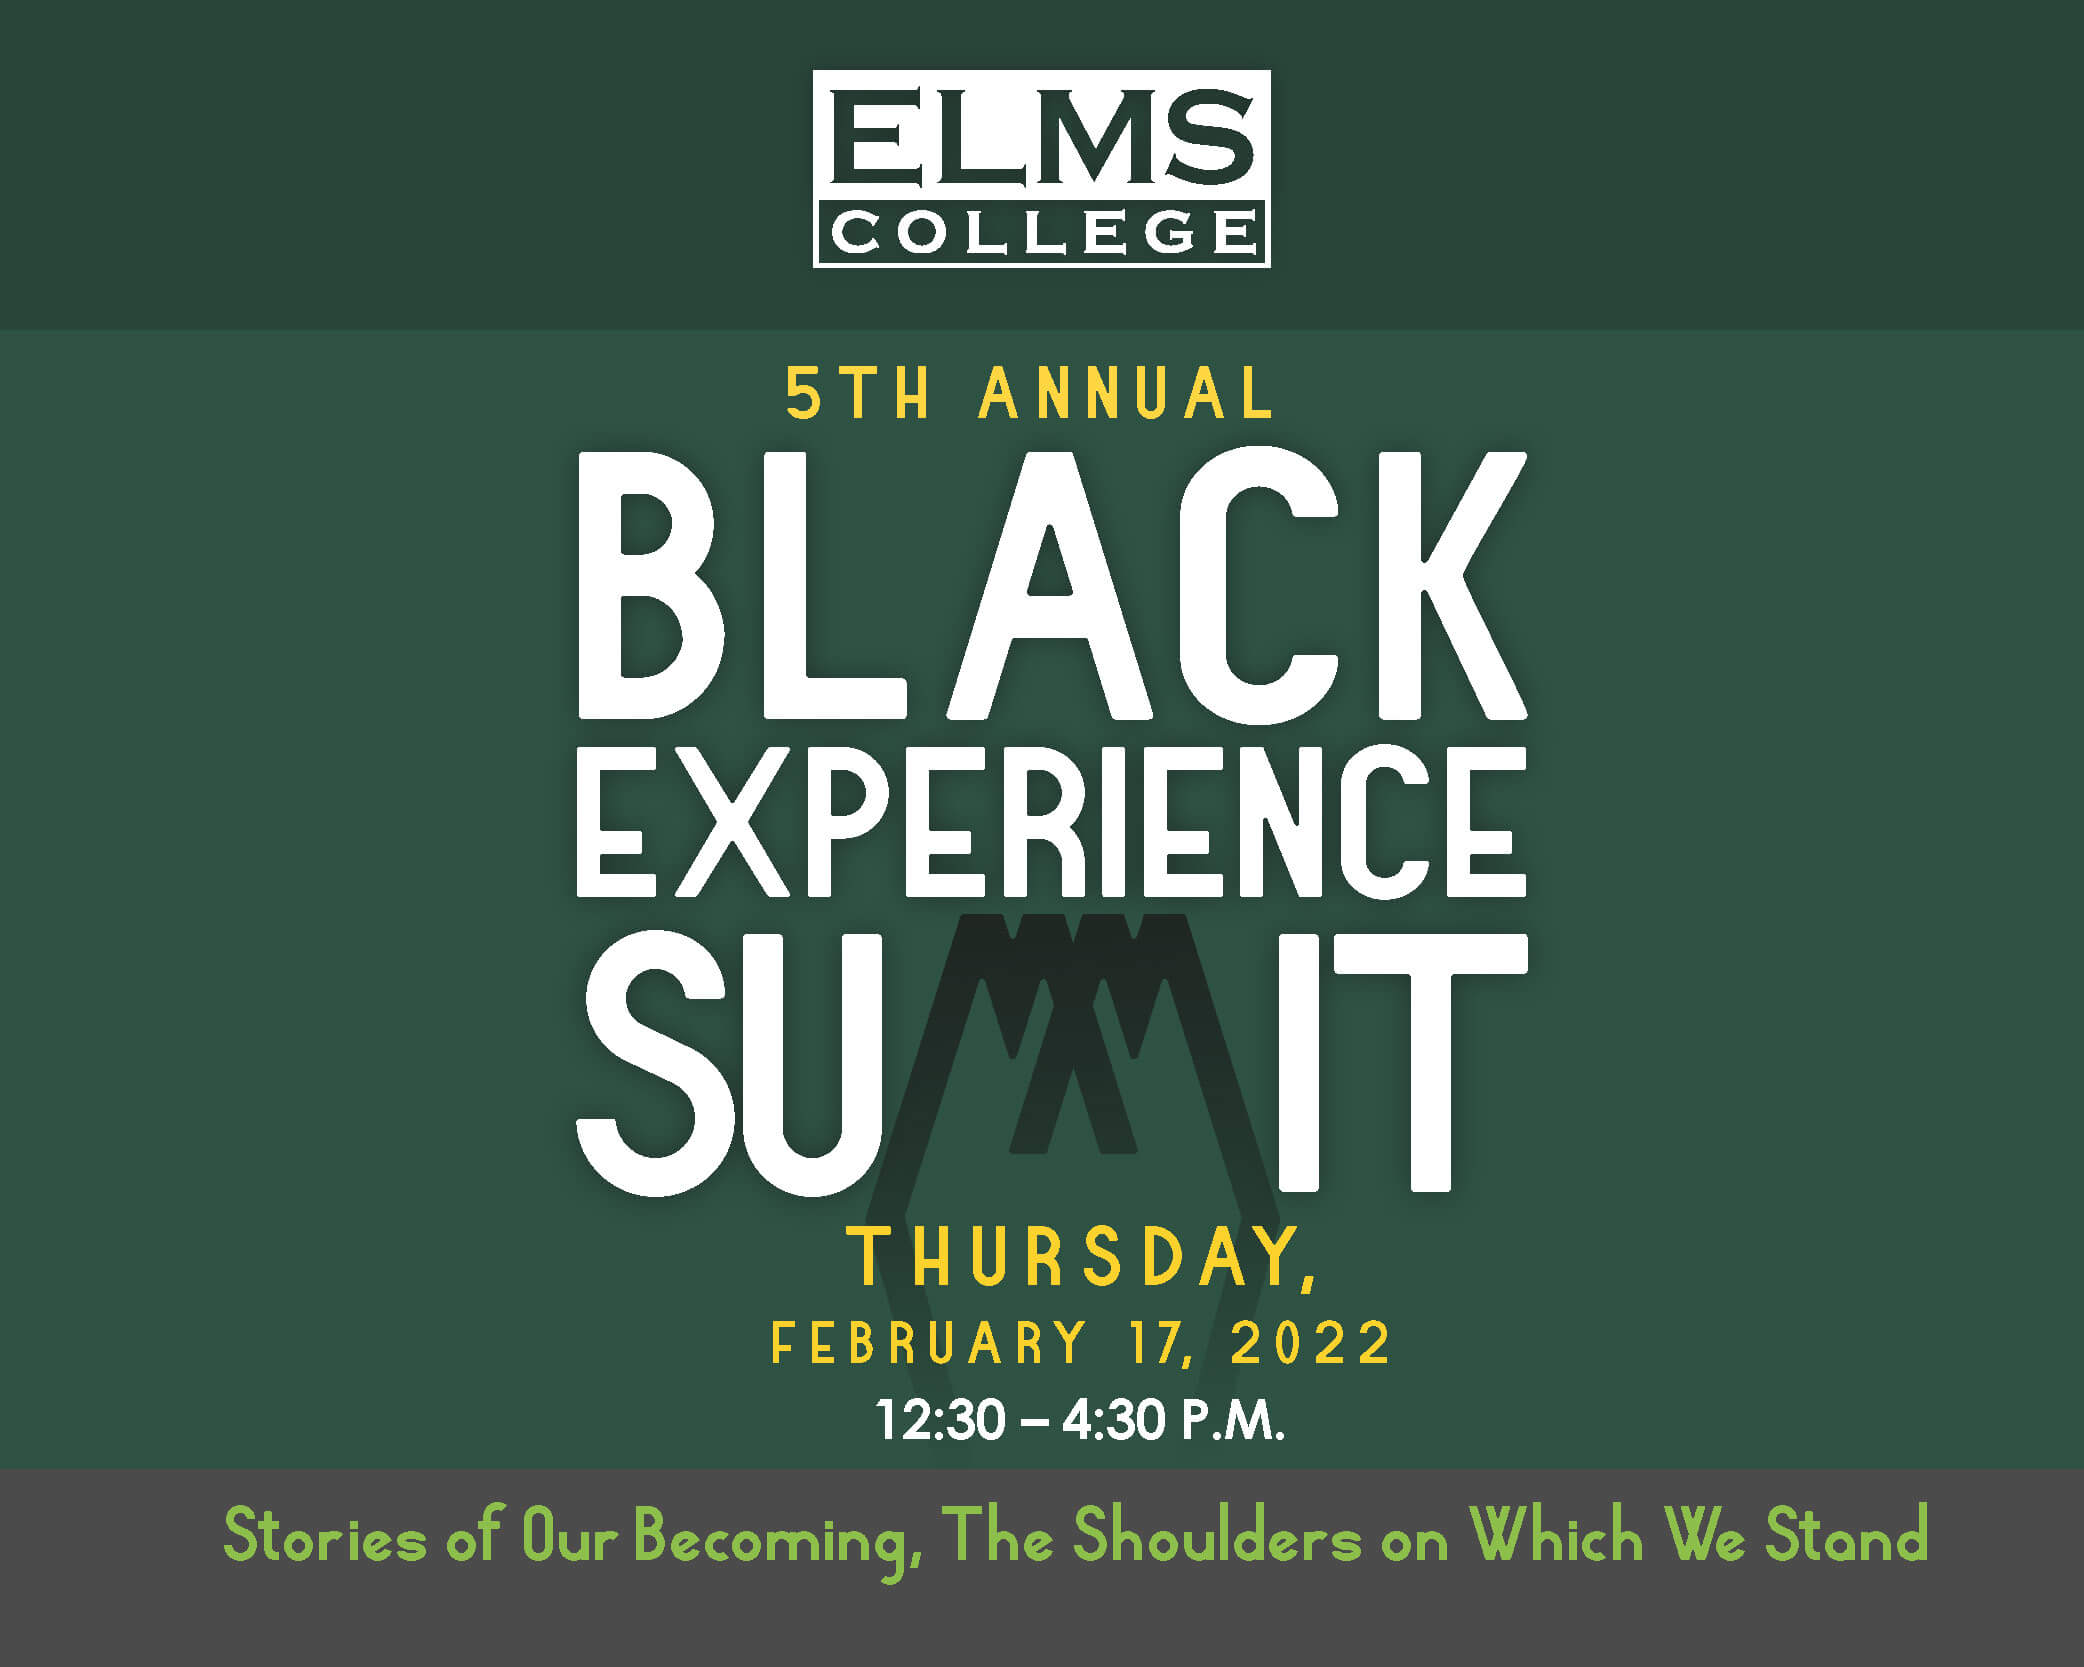 5th annual black experience summit. Thursday, February 17, 2022 12:30 - 4:30pm